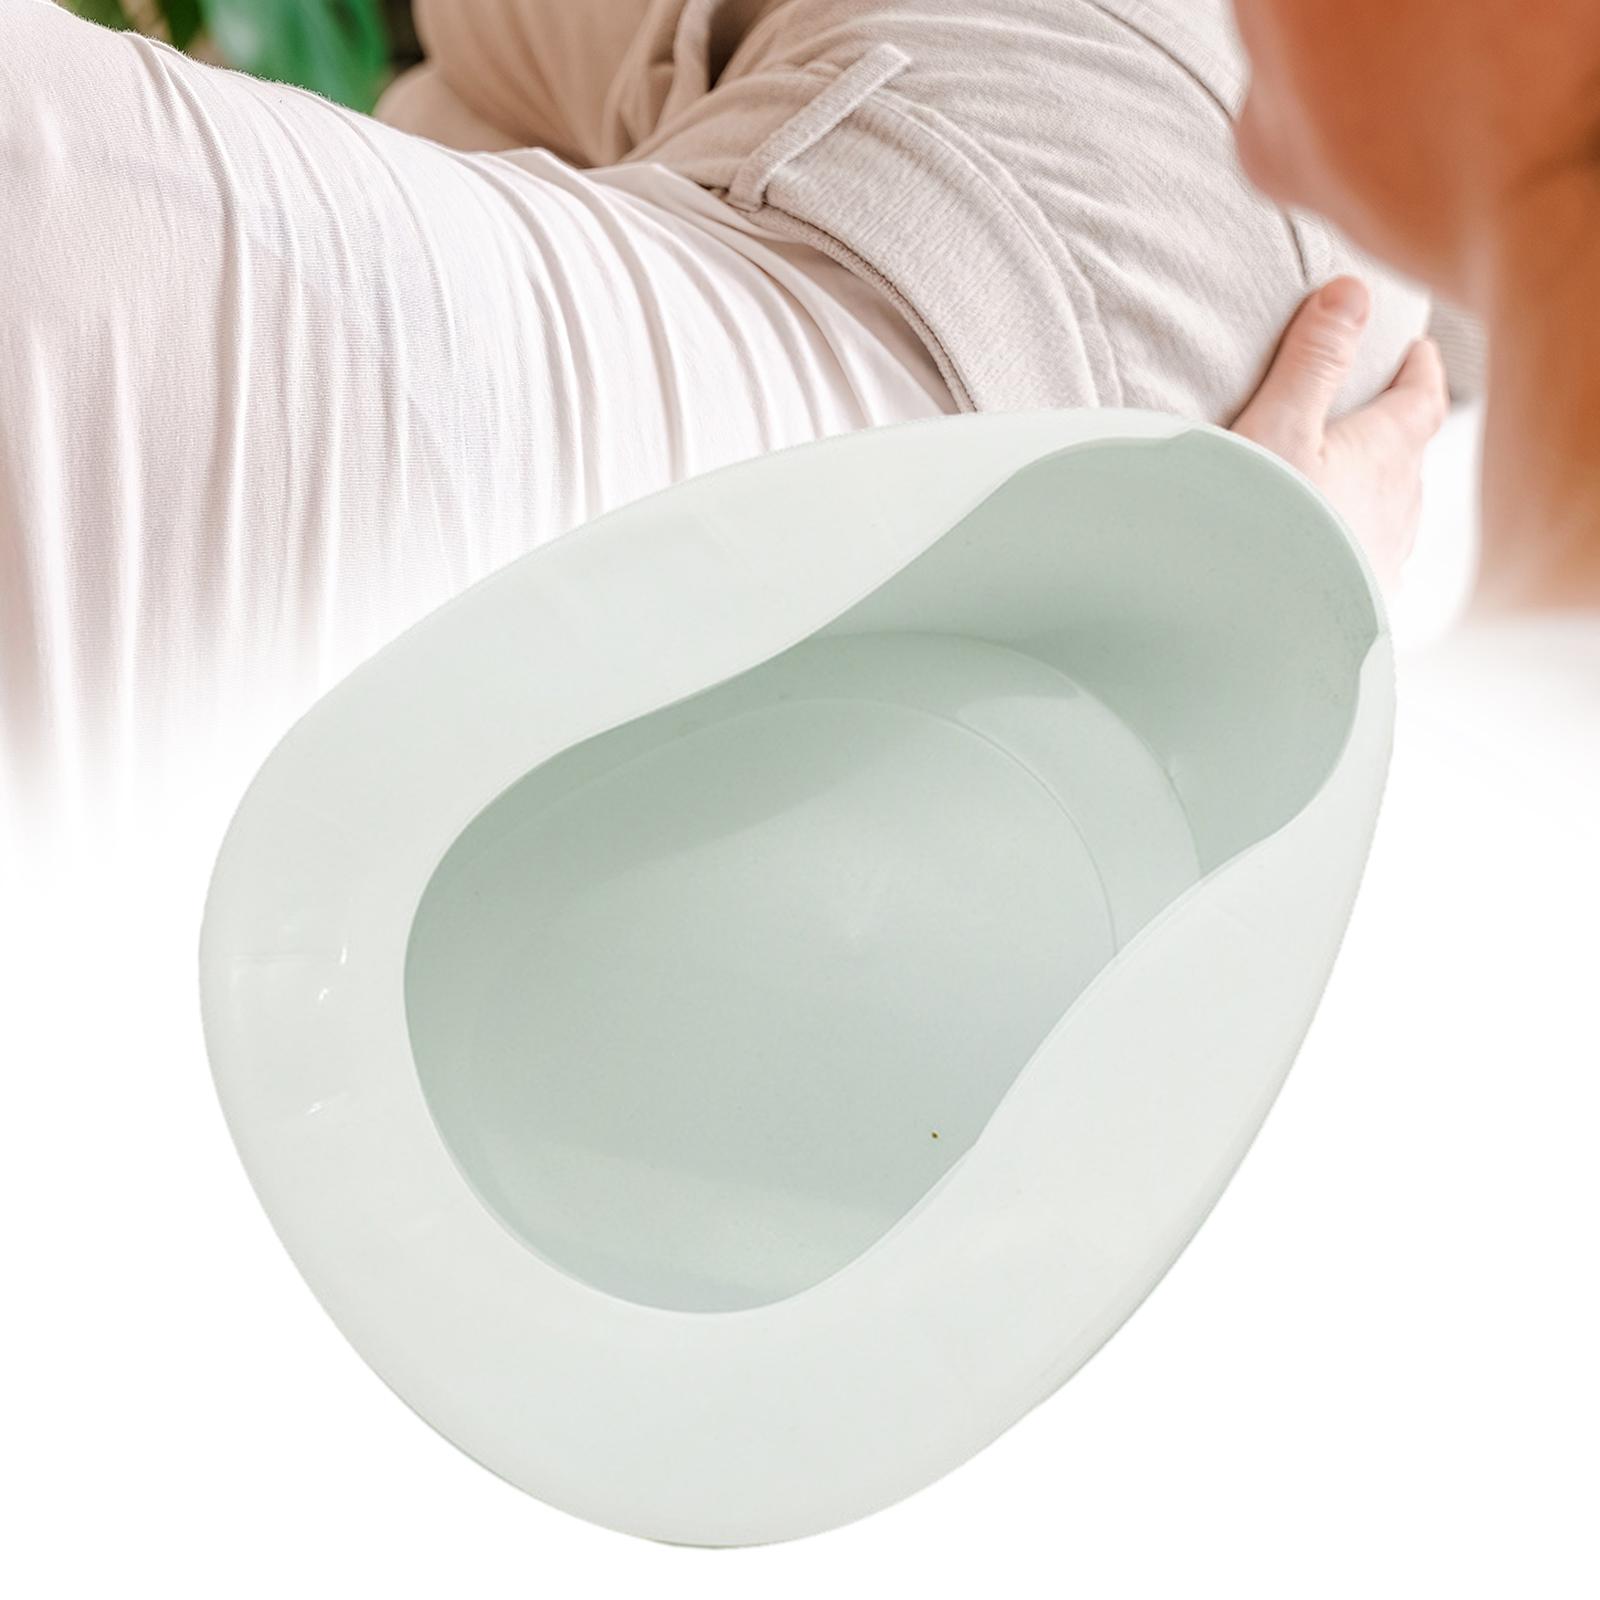 Home Bed Pan Adult Bedpan Pee Container for Bed Bound Home Use Men and Women